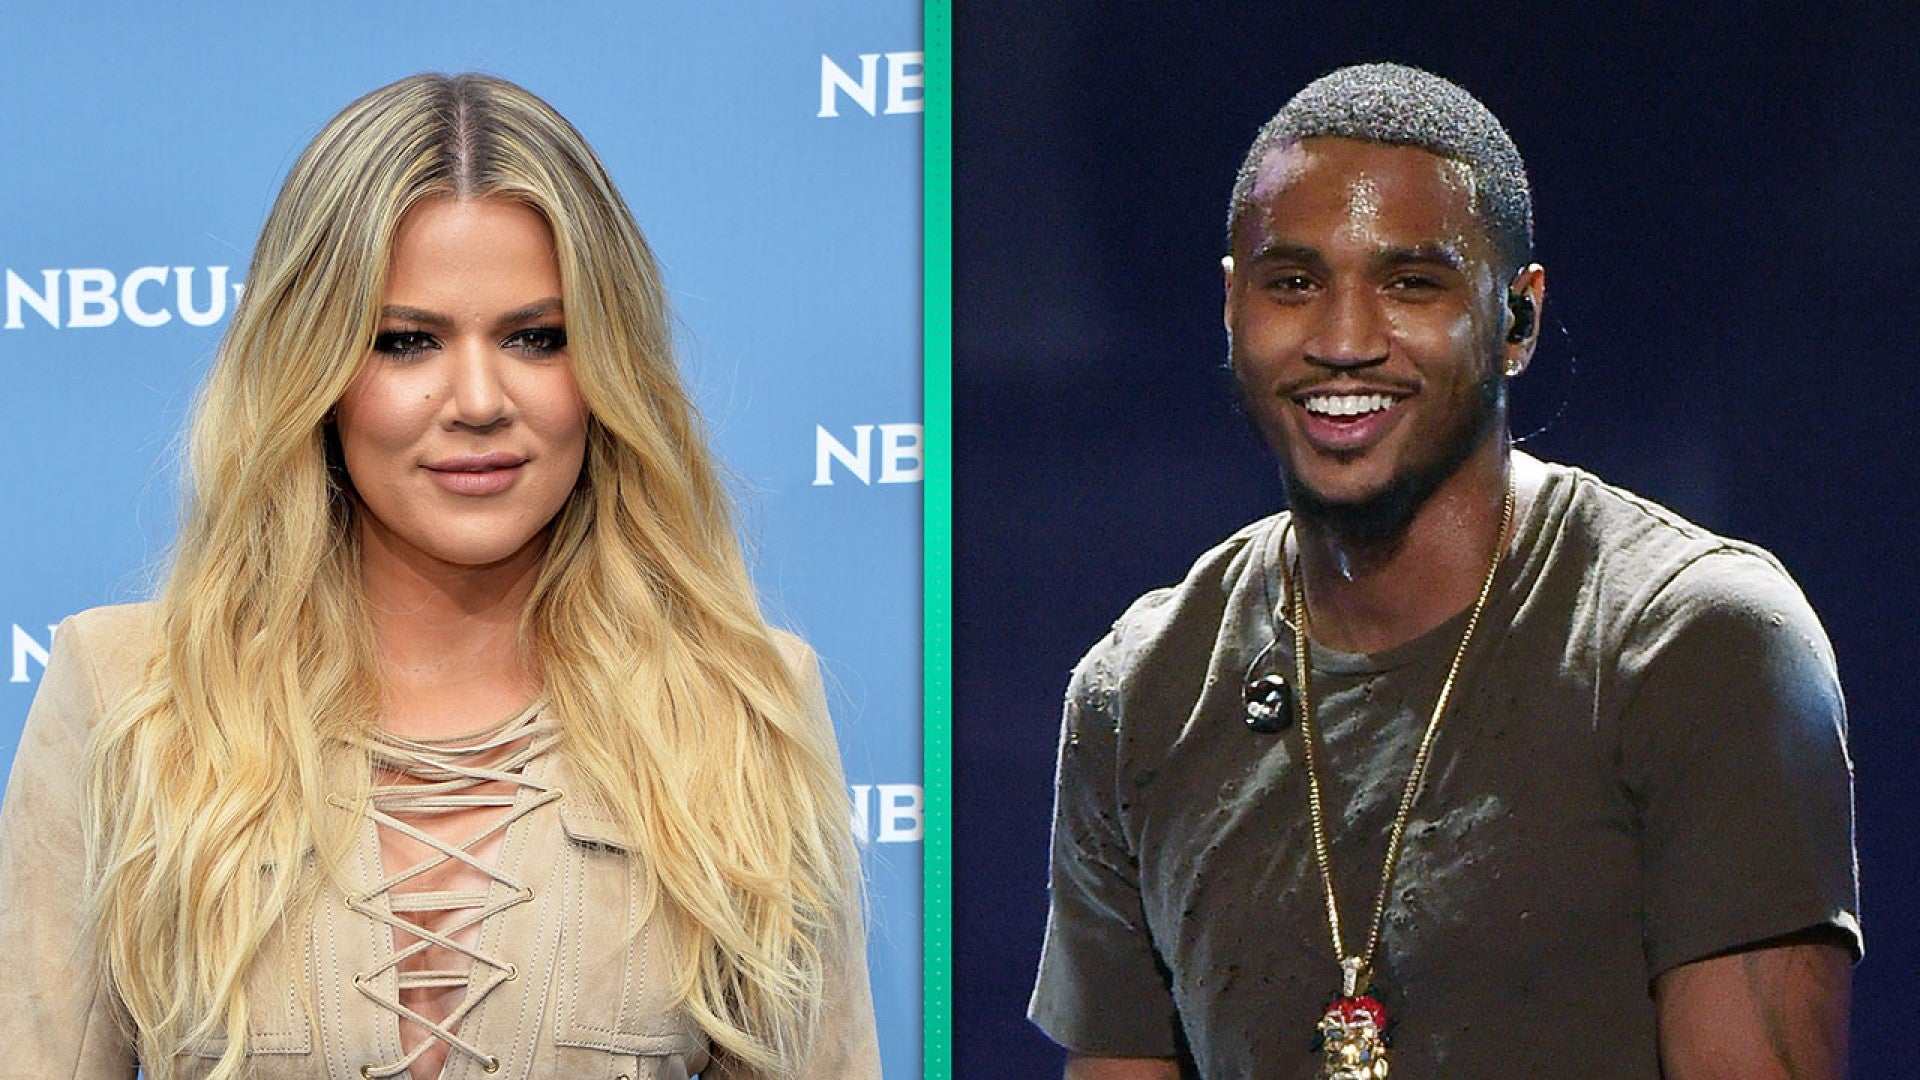 EXCLUSIVE: Khloe Kardashian Caught Making Out With Trey Songz in Las Vegas  | Entertainment Tonight